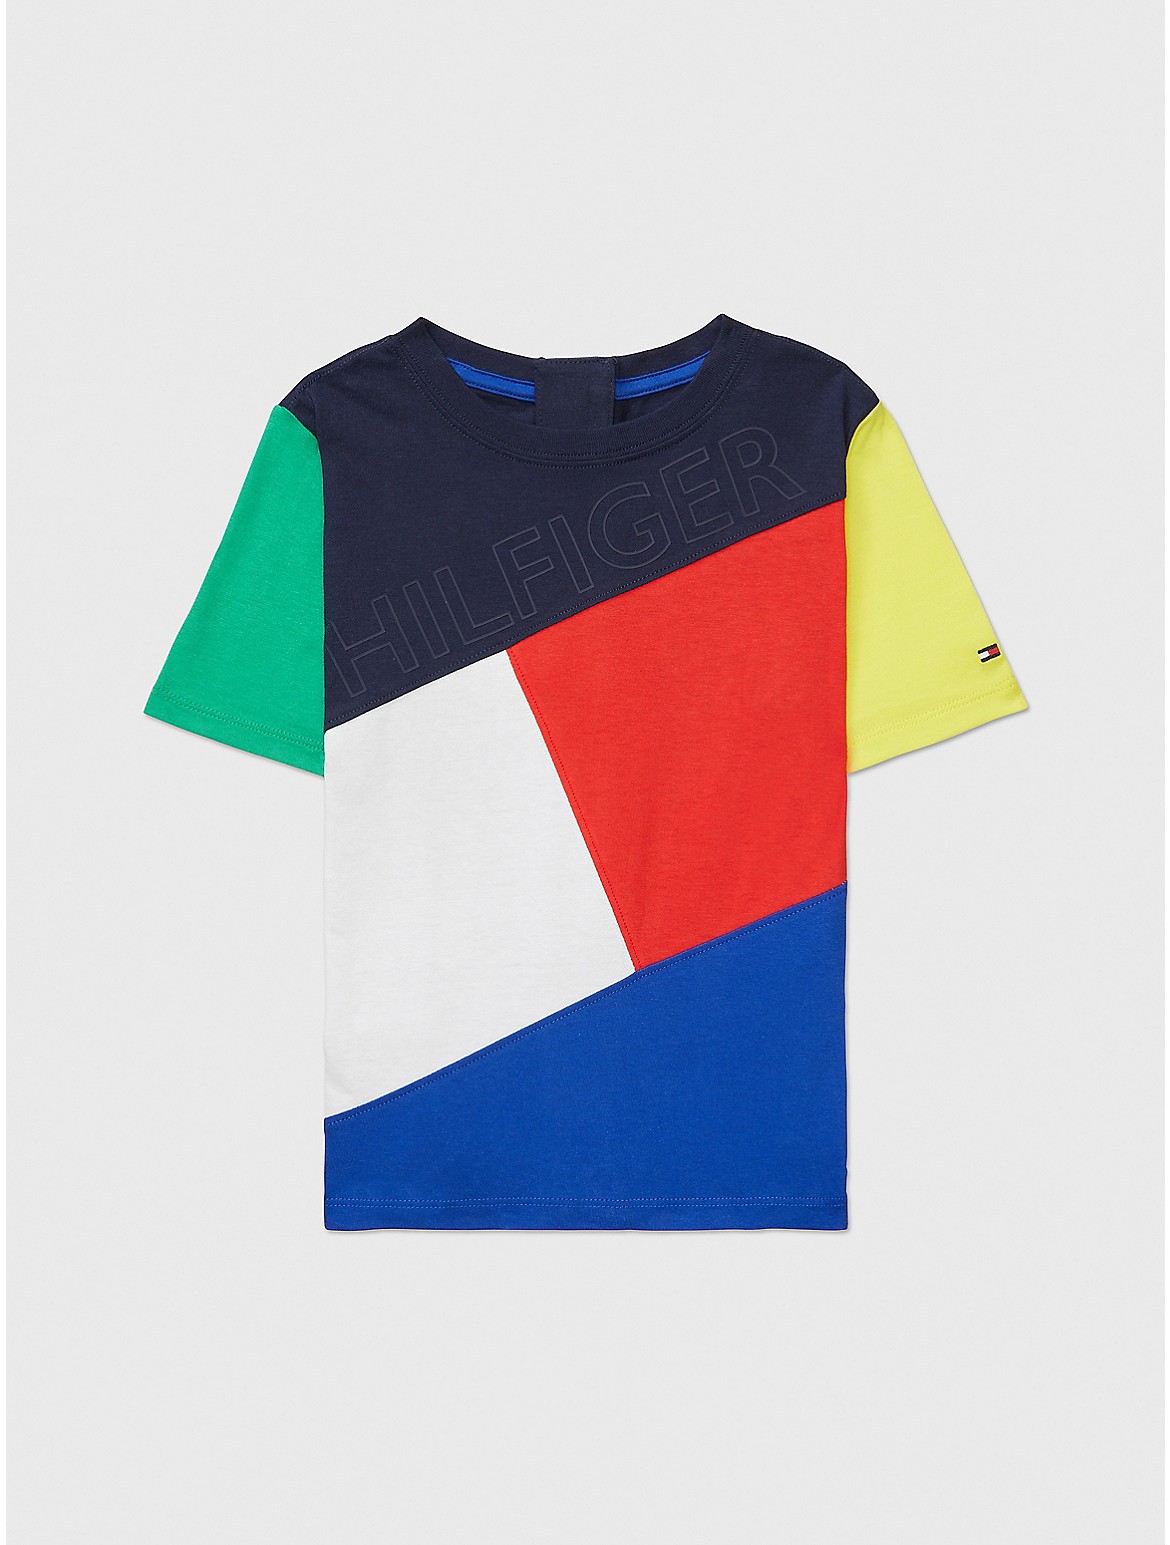 Tommy Hilfiger Boys' Seated Fit Colorblock Flag T-Shirt - Multi - M